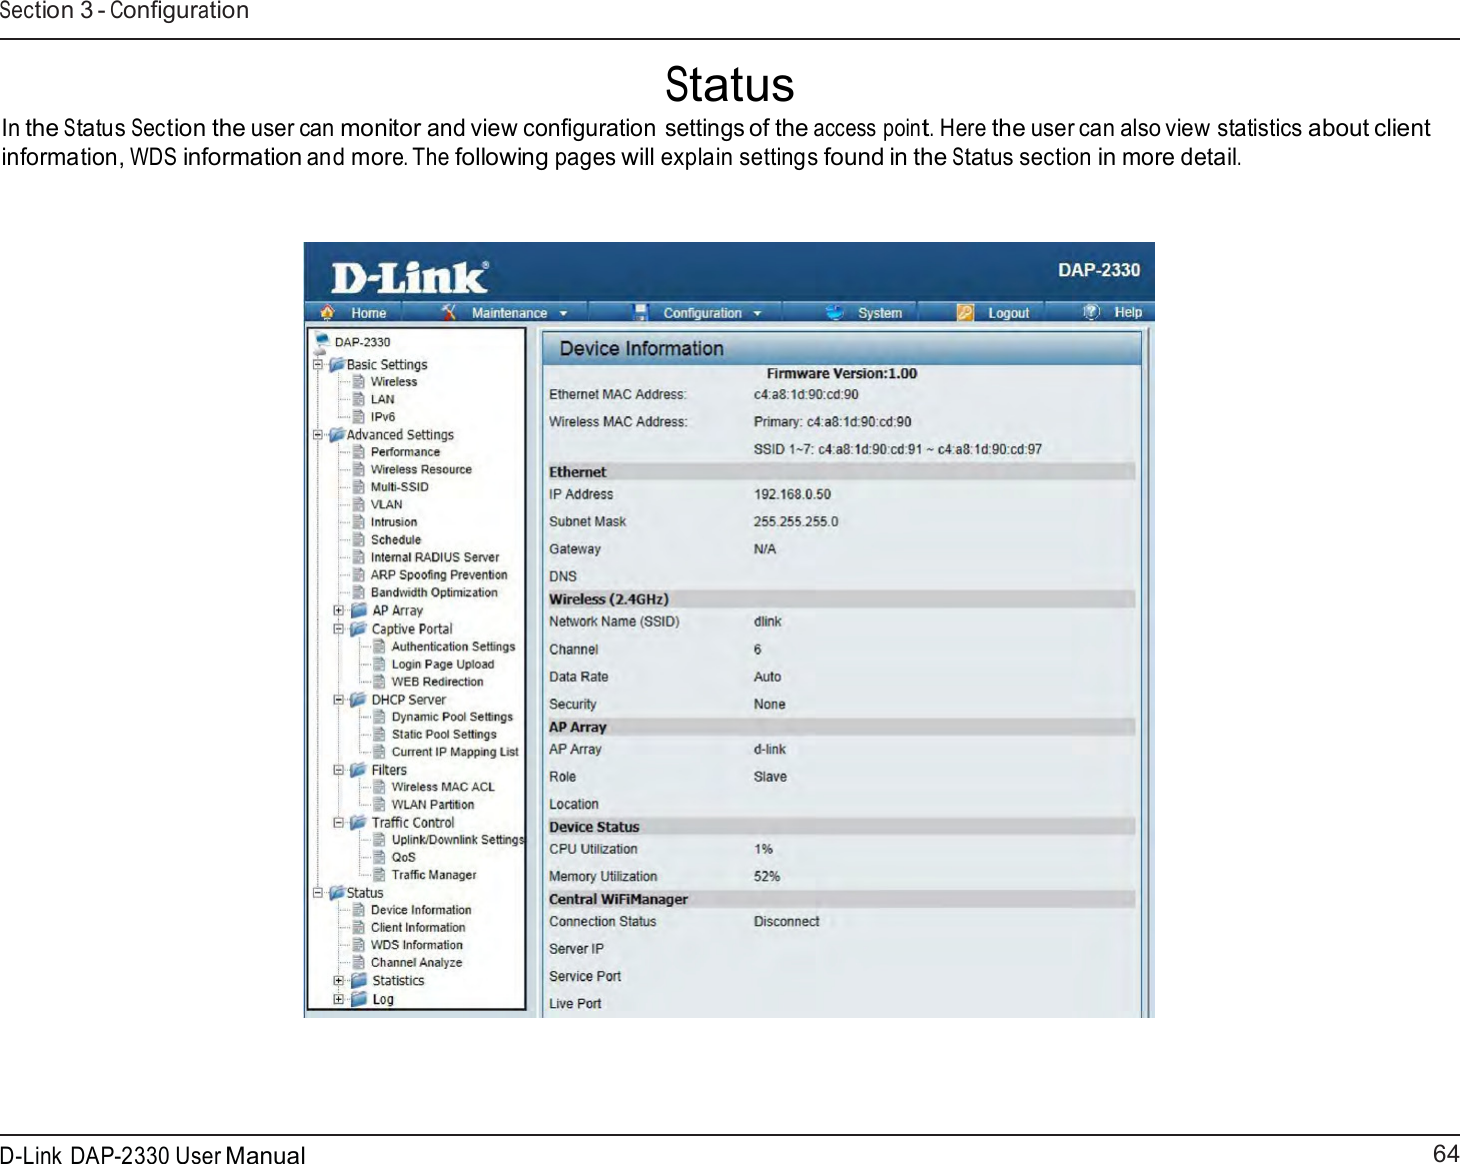 64 D-Link DAP-2330 User ManualSection 3 - Configuration    Status In the Status Section the user can monitor and view configuration settings of the access point. Here the user can also view statistics about client information, WDS information and more. The following pages will explain settings found in the Status section in more detail.     